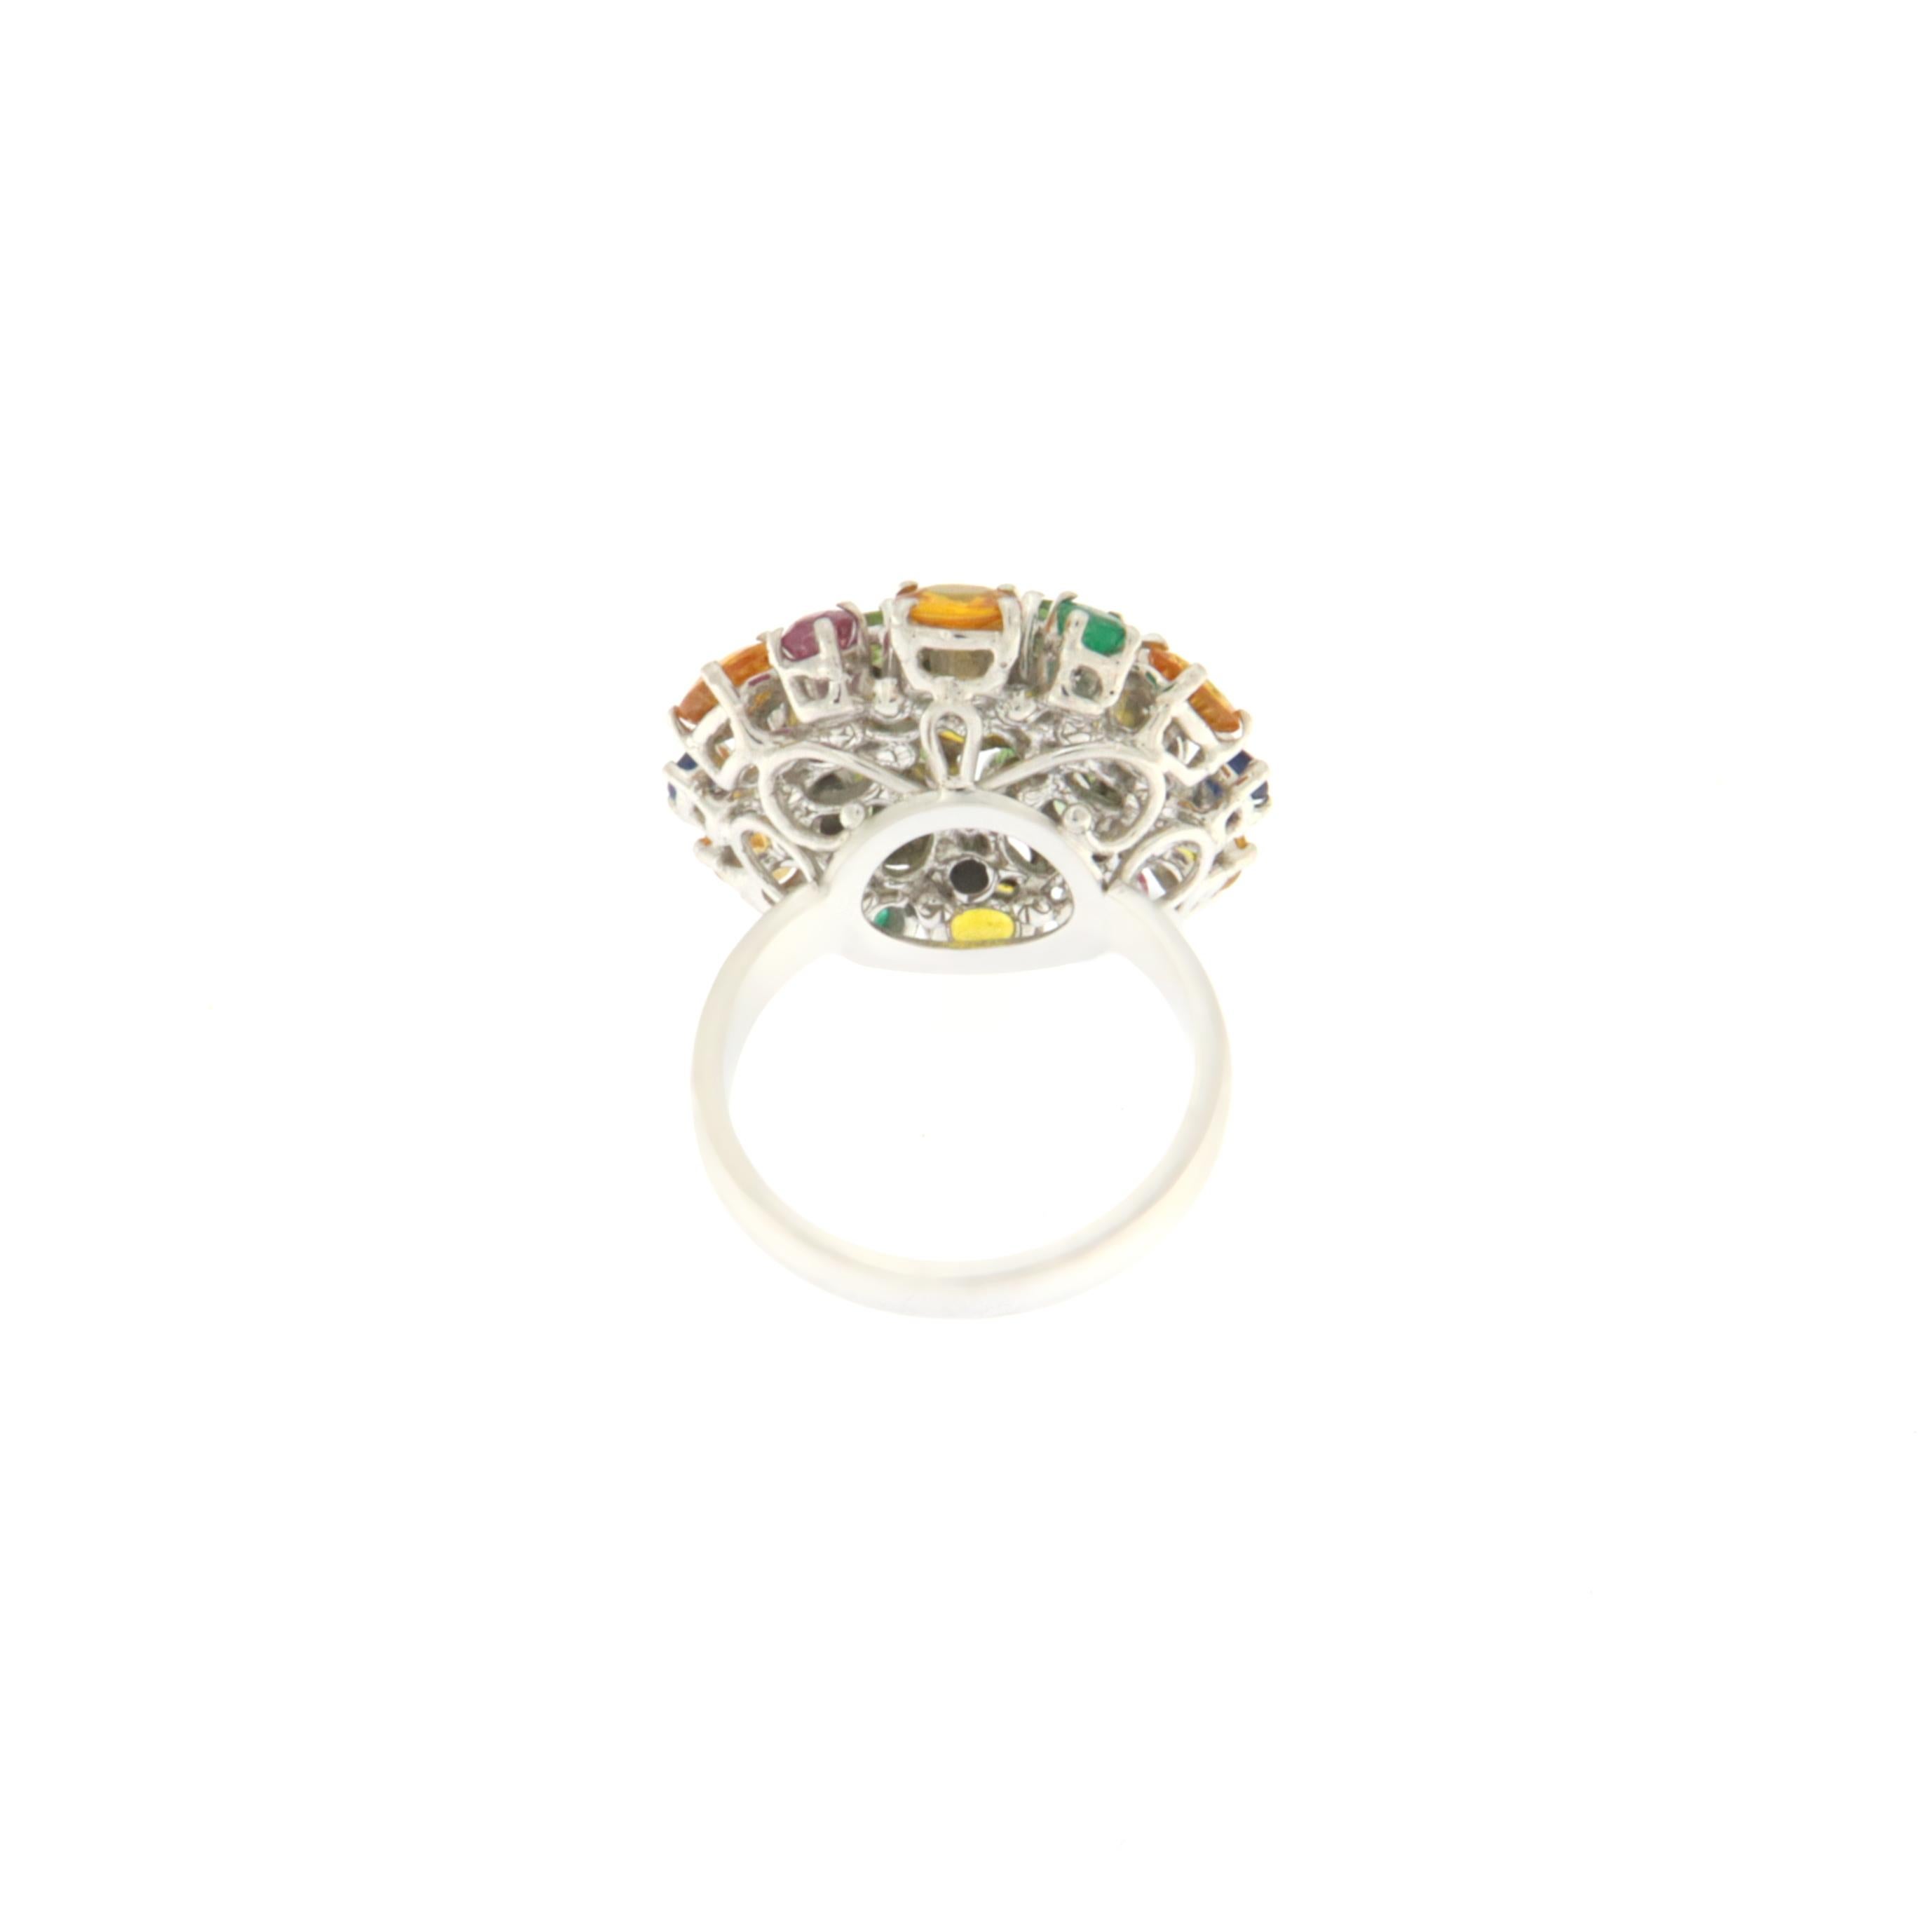 Sapphires Diamonds Emeralds Rubies 18 Karat White Gold Cockatil Ring In New Condition For Sale In Marcianise, IT